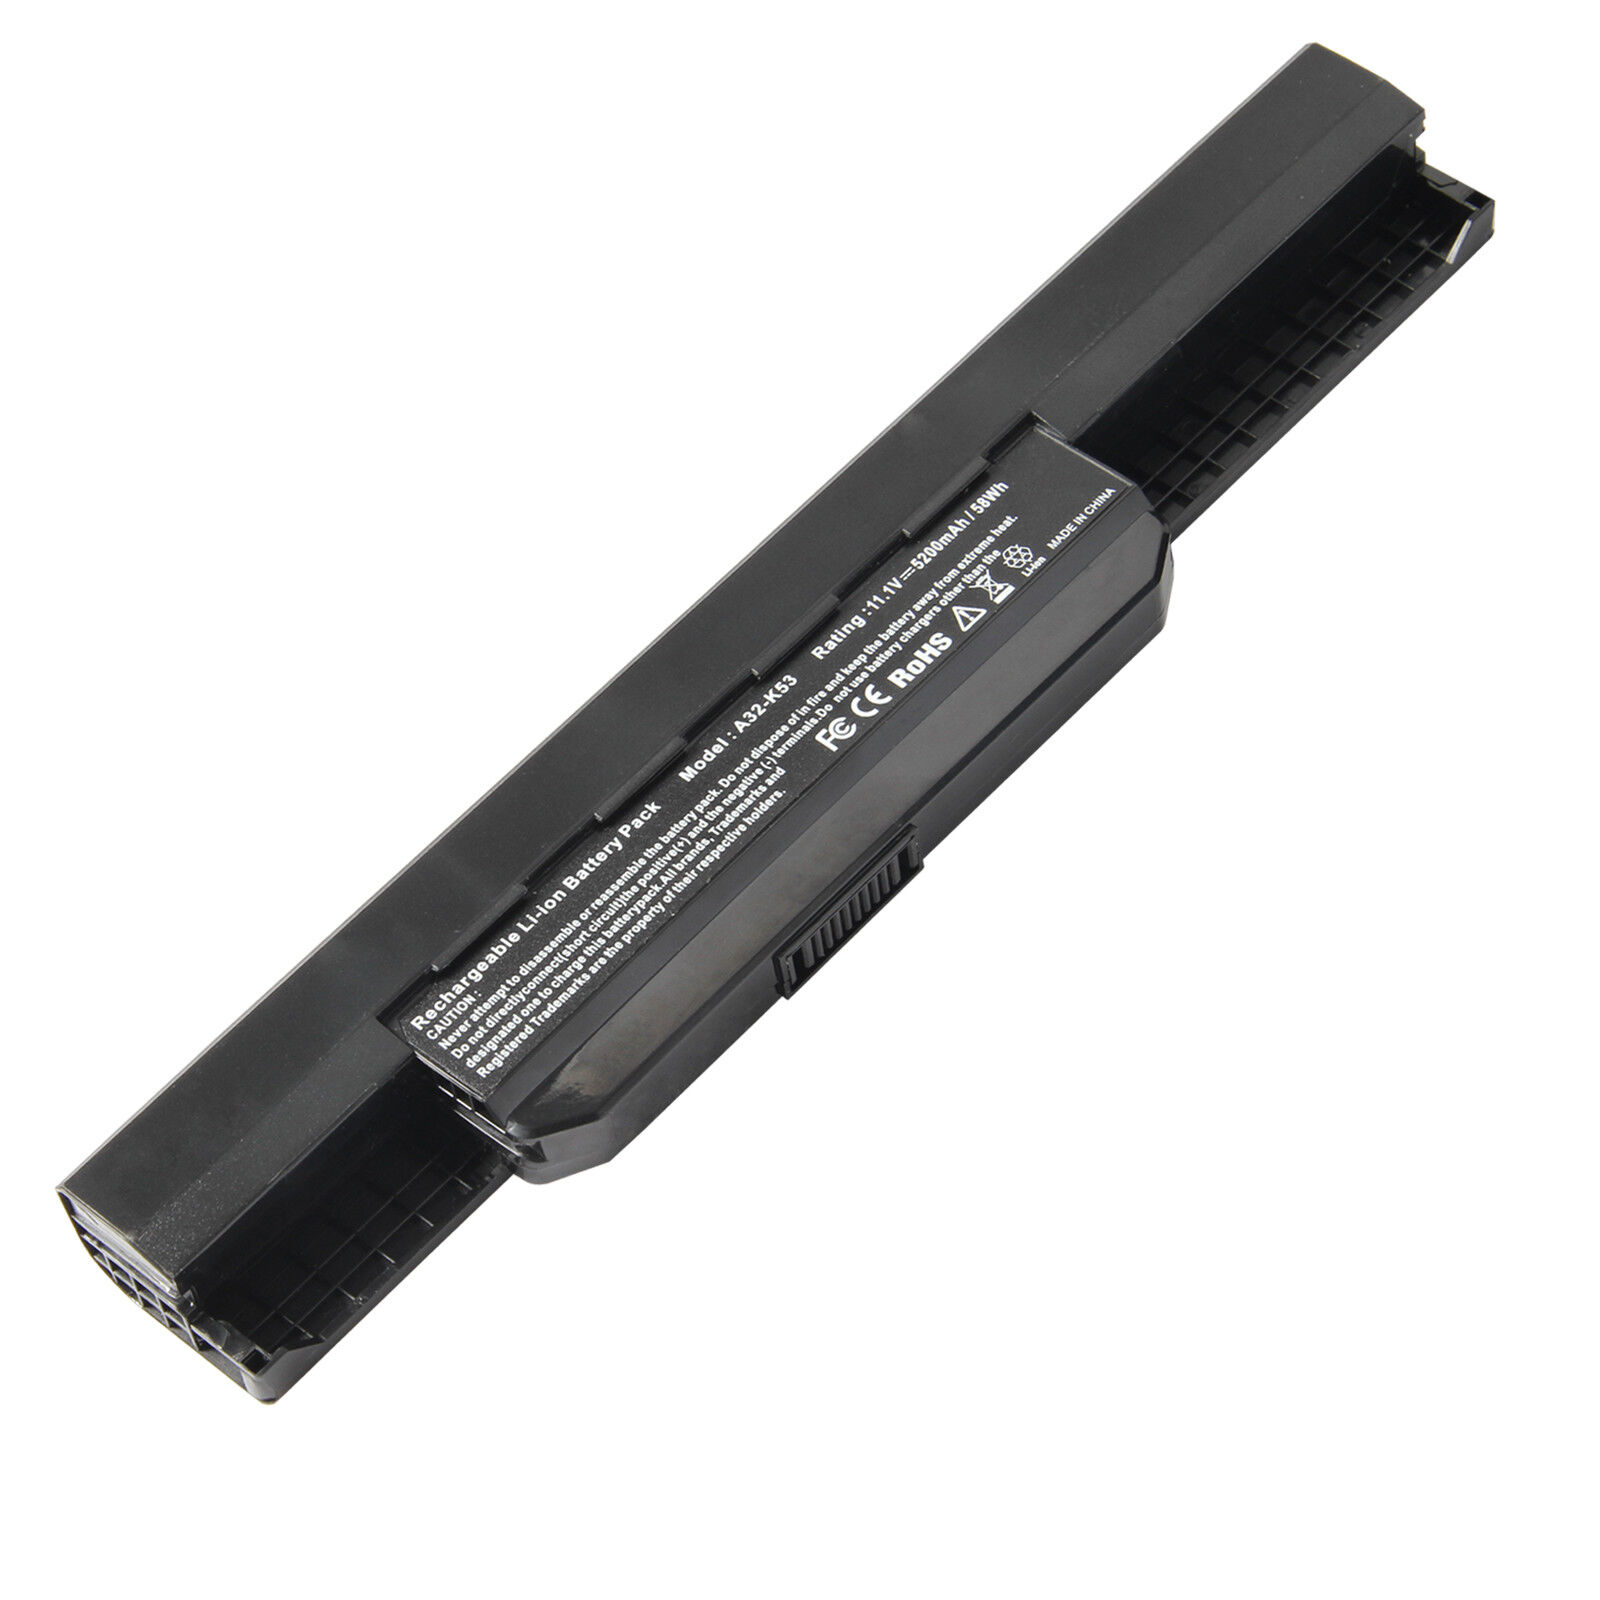  Battery + Charger for Asus A32-K53 A41-K53 for ASUS K53 K53E X54C X53S